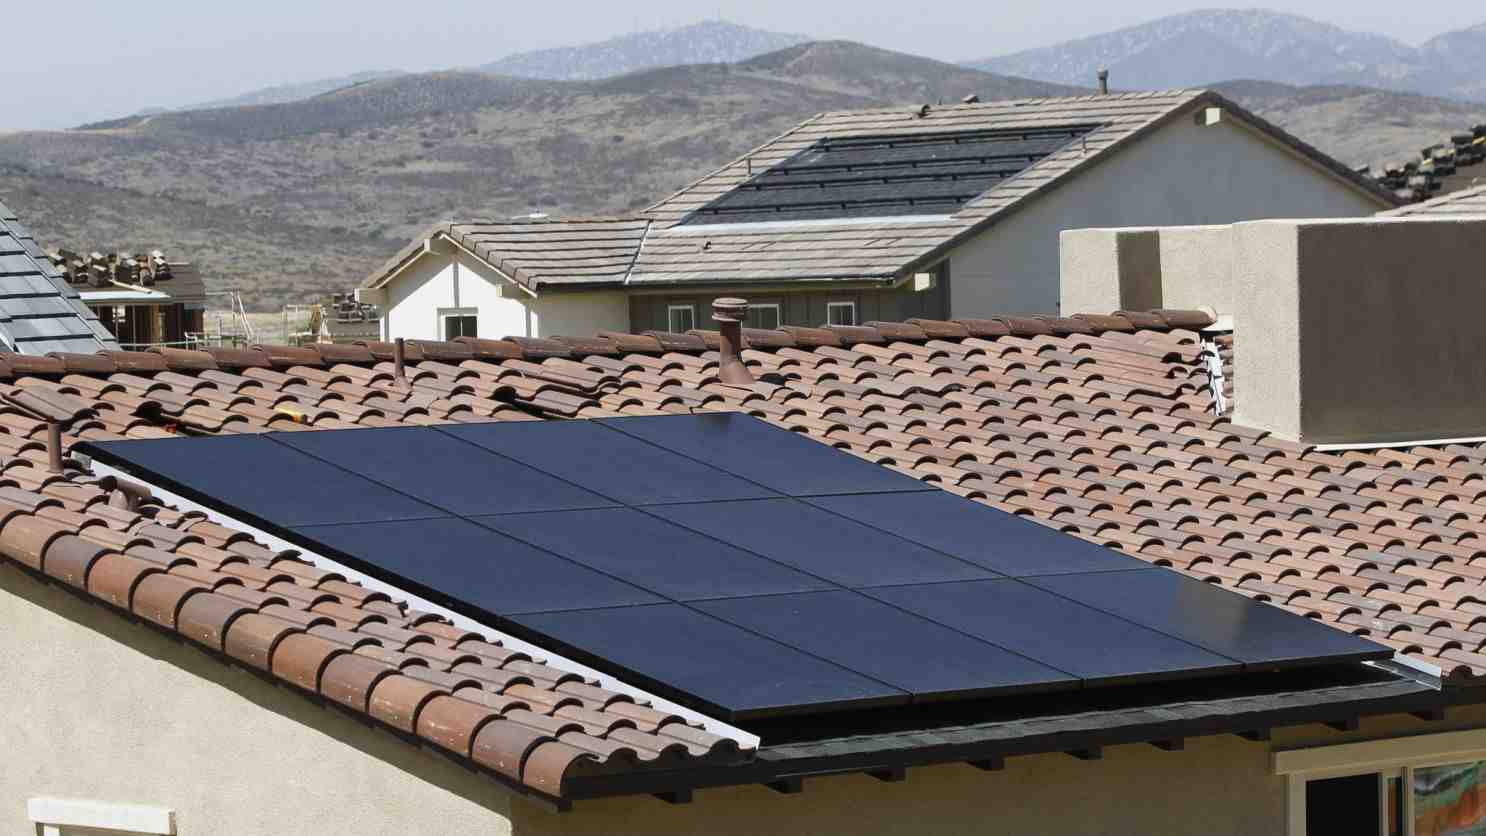 Is San Diego a good place for solar panels?